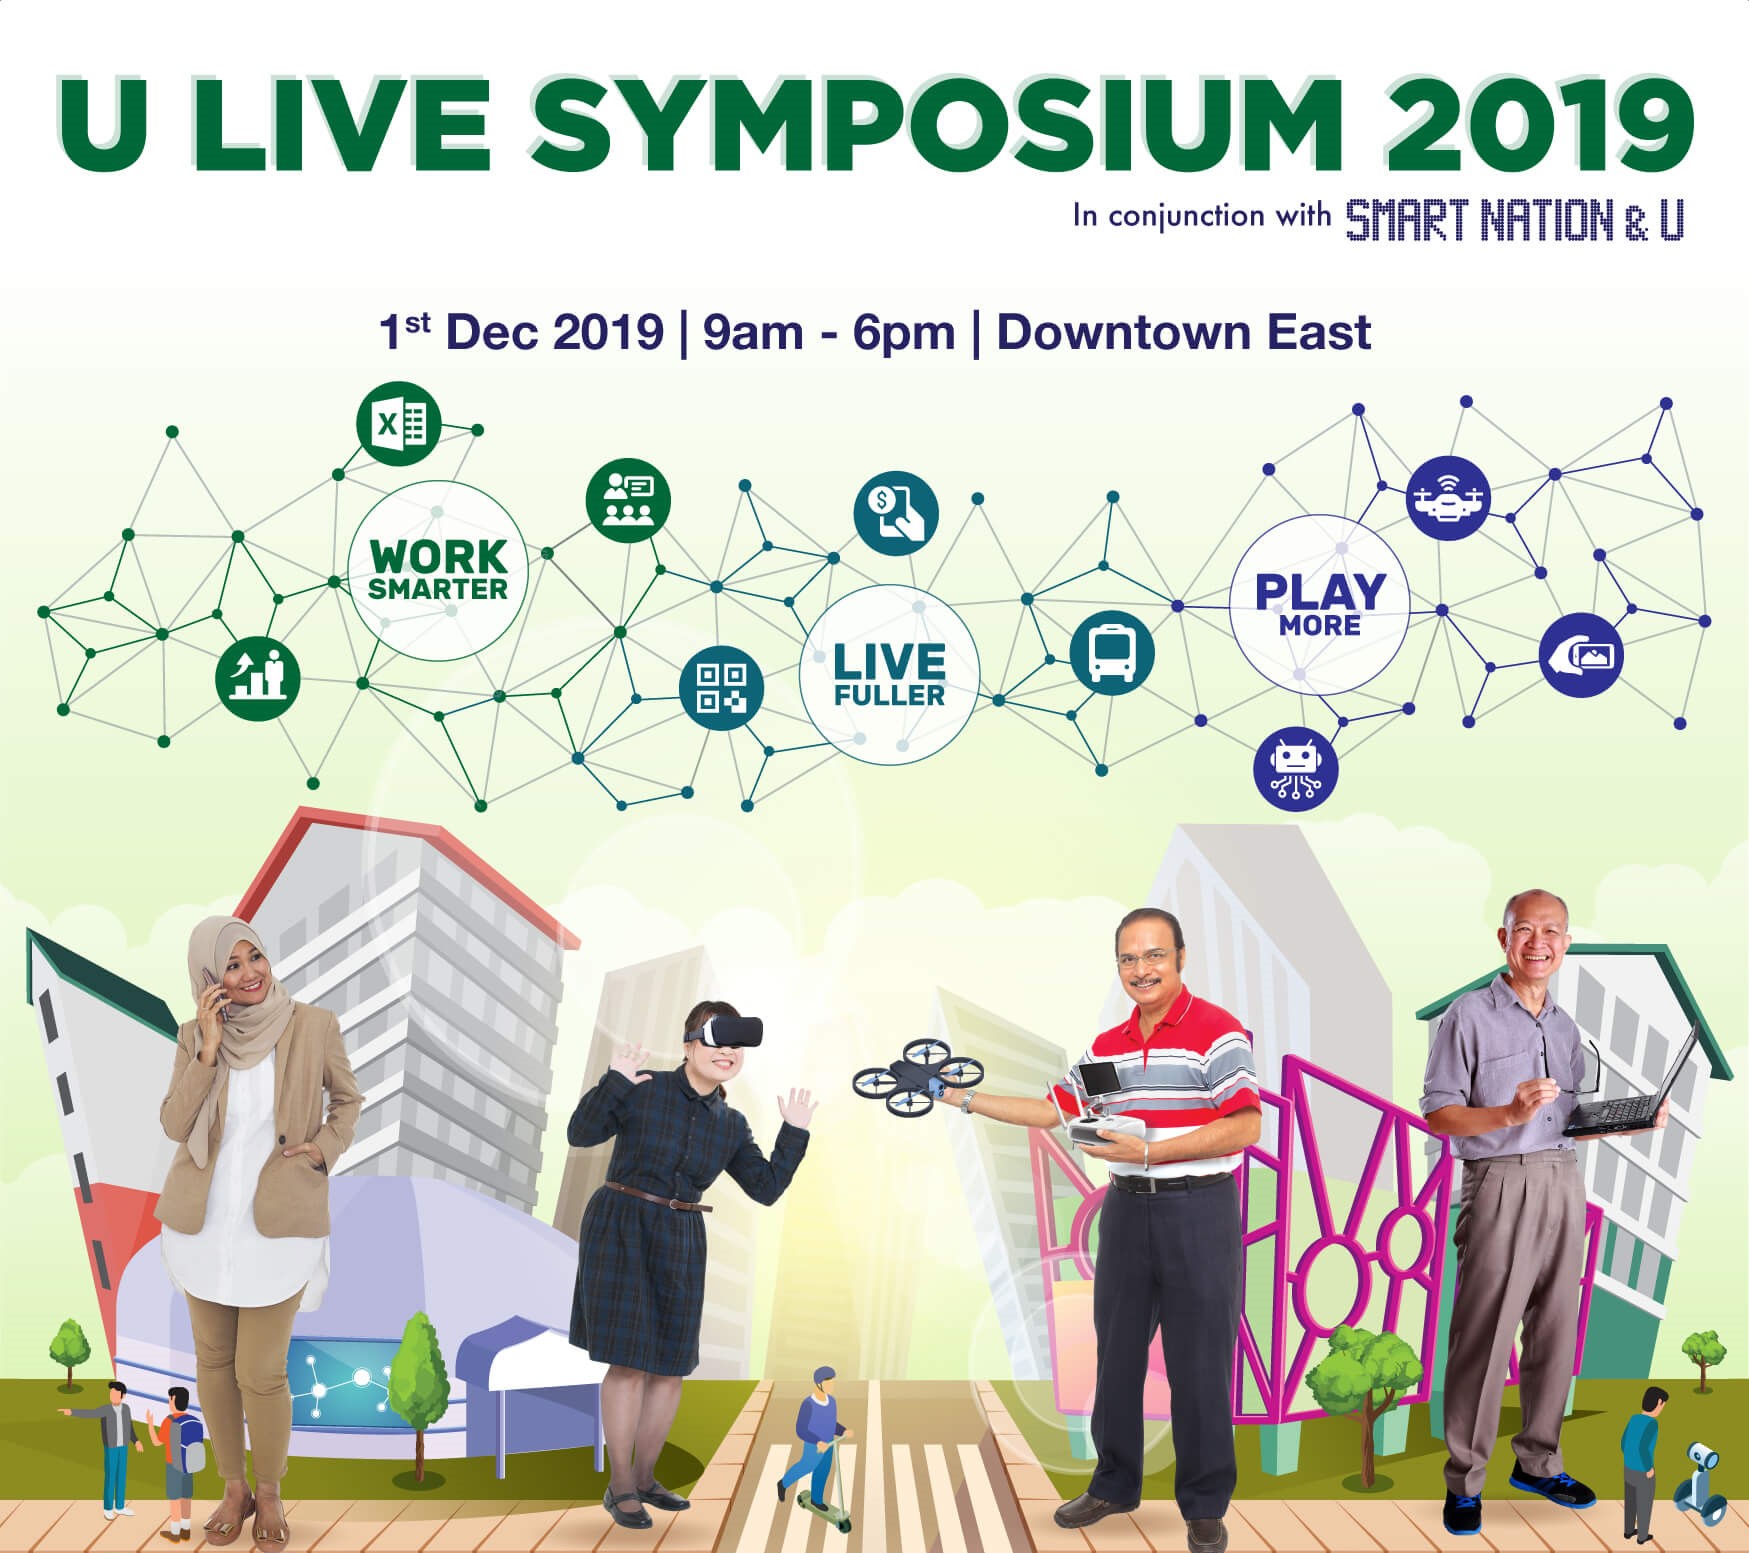 Digital for Life Fund Project: Poster of the U Live Symposium 2019, featuring popular tech workshops for active agers